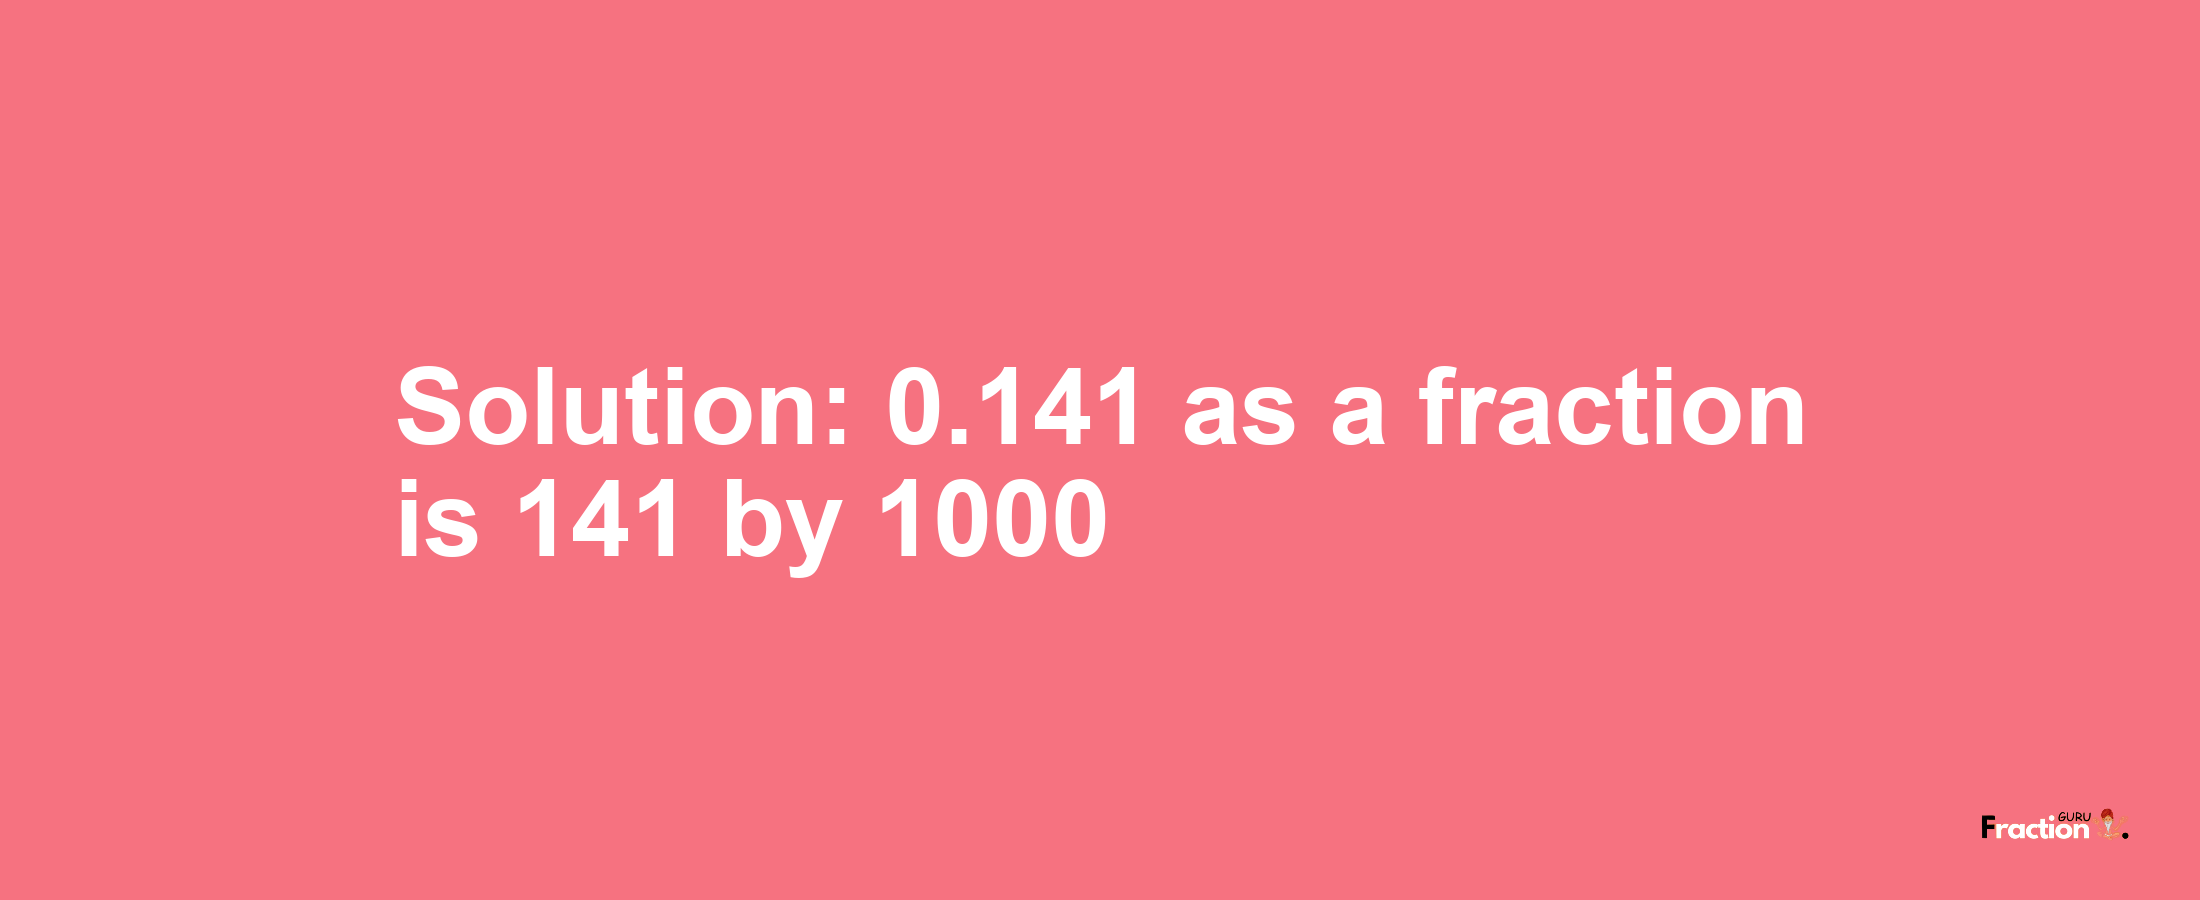 Solution:0.141 as a fraction is 141/1000